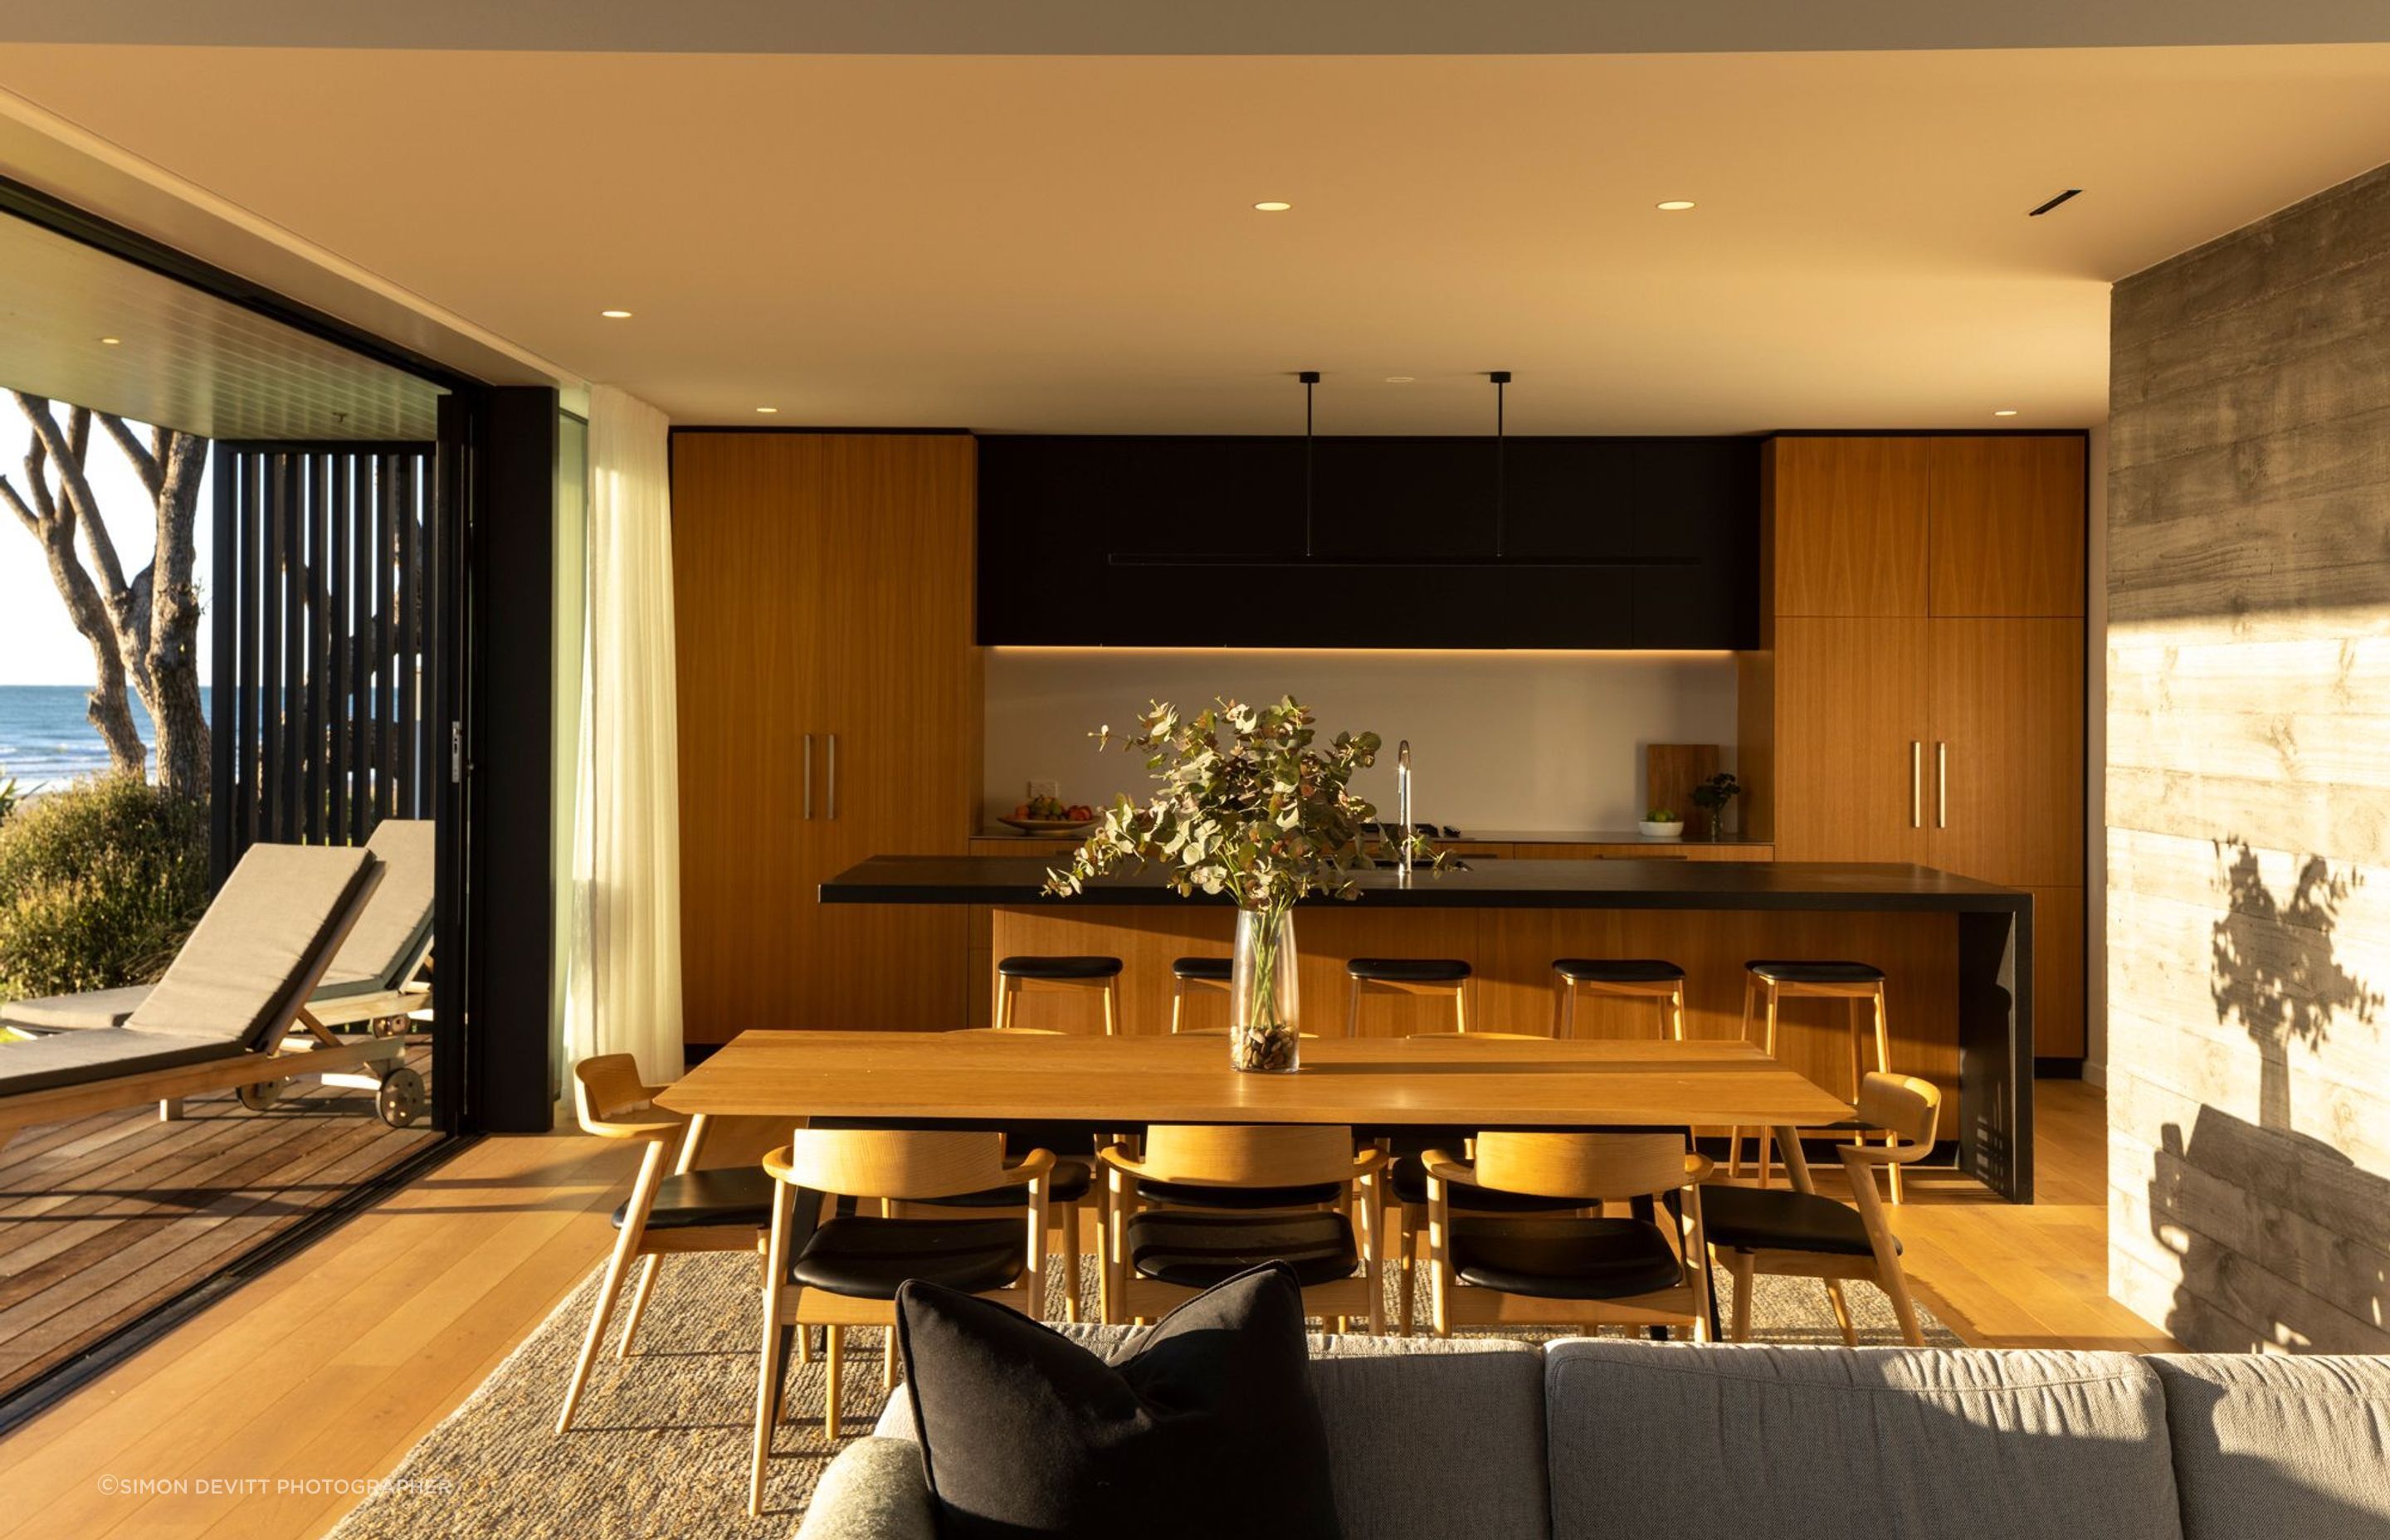 The morning light illuminates the kitchen, dining and living space.